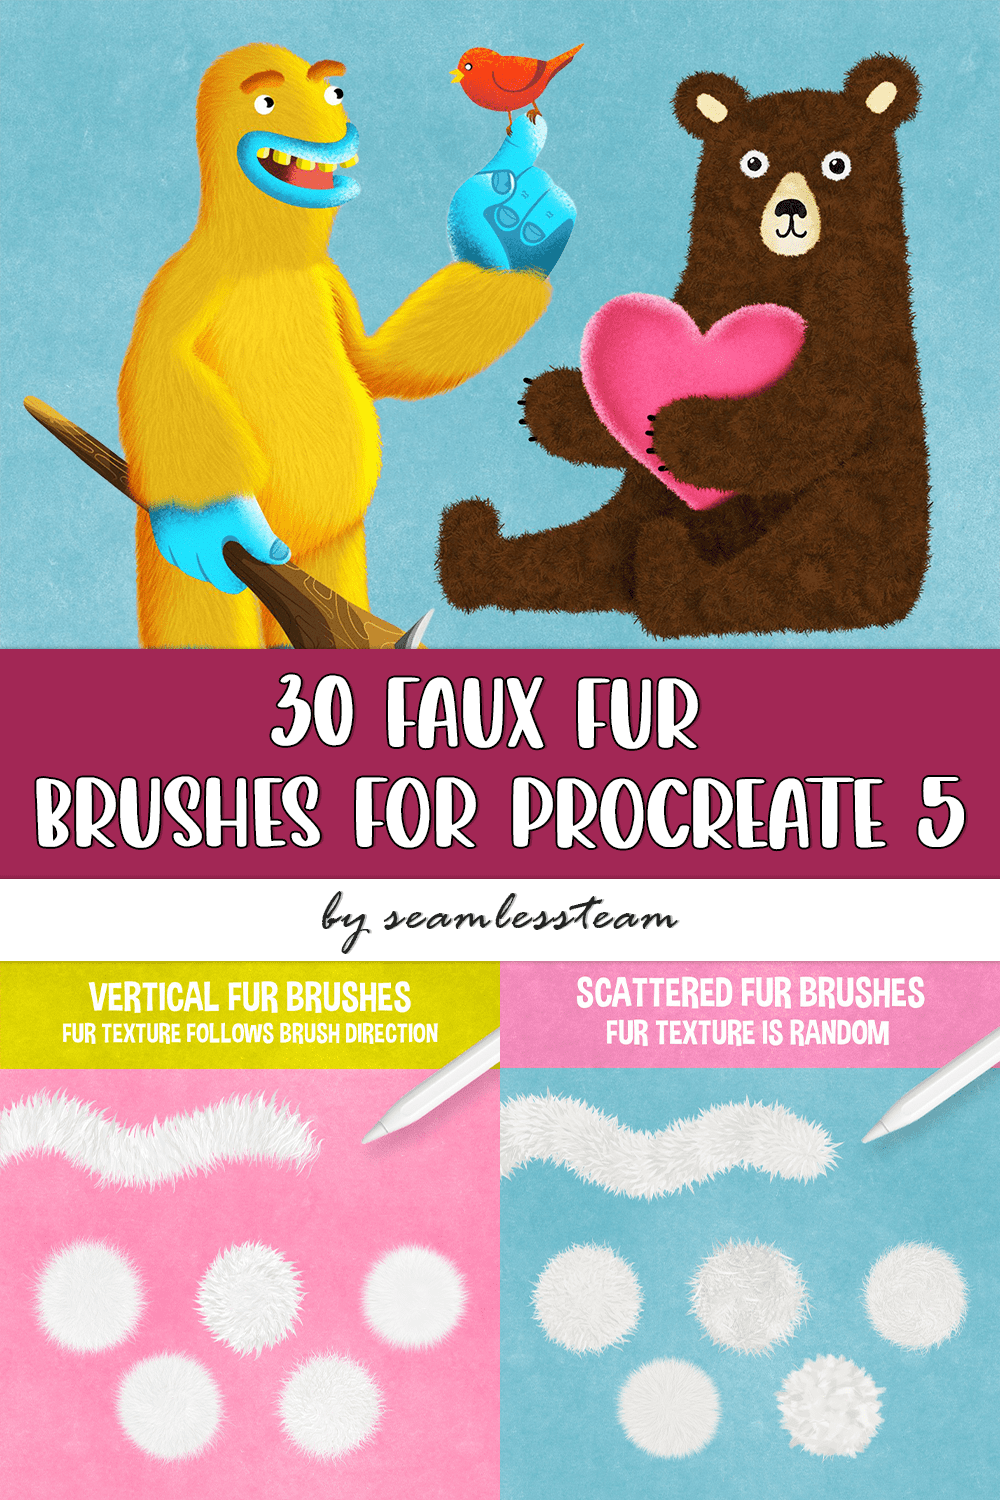 30 Faux Fur Brushes For Procreate 5 - Pinterest.